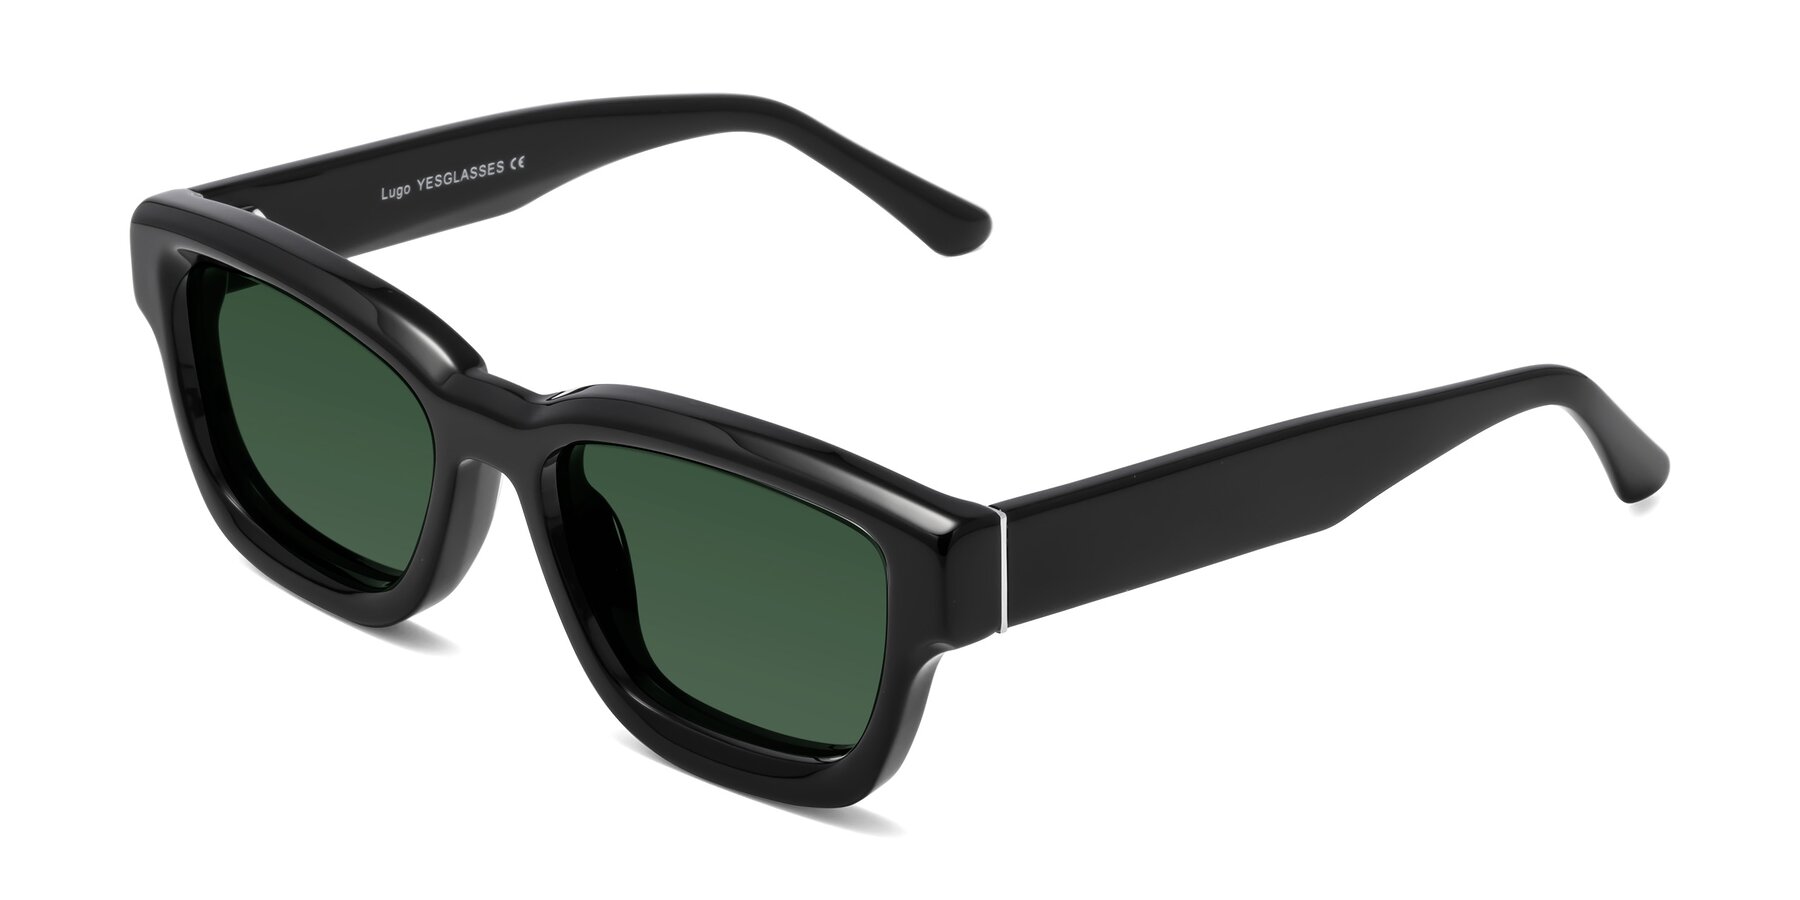 Angle of Lugo in Black with Green Tinted Lenses